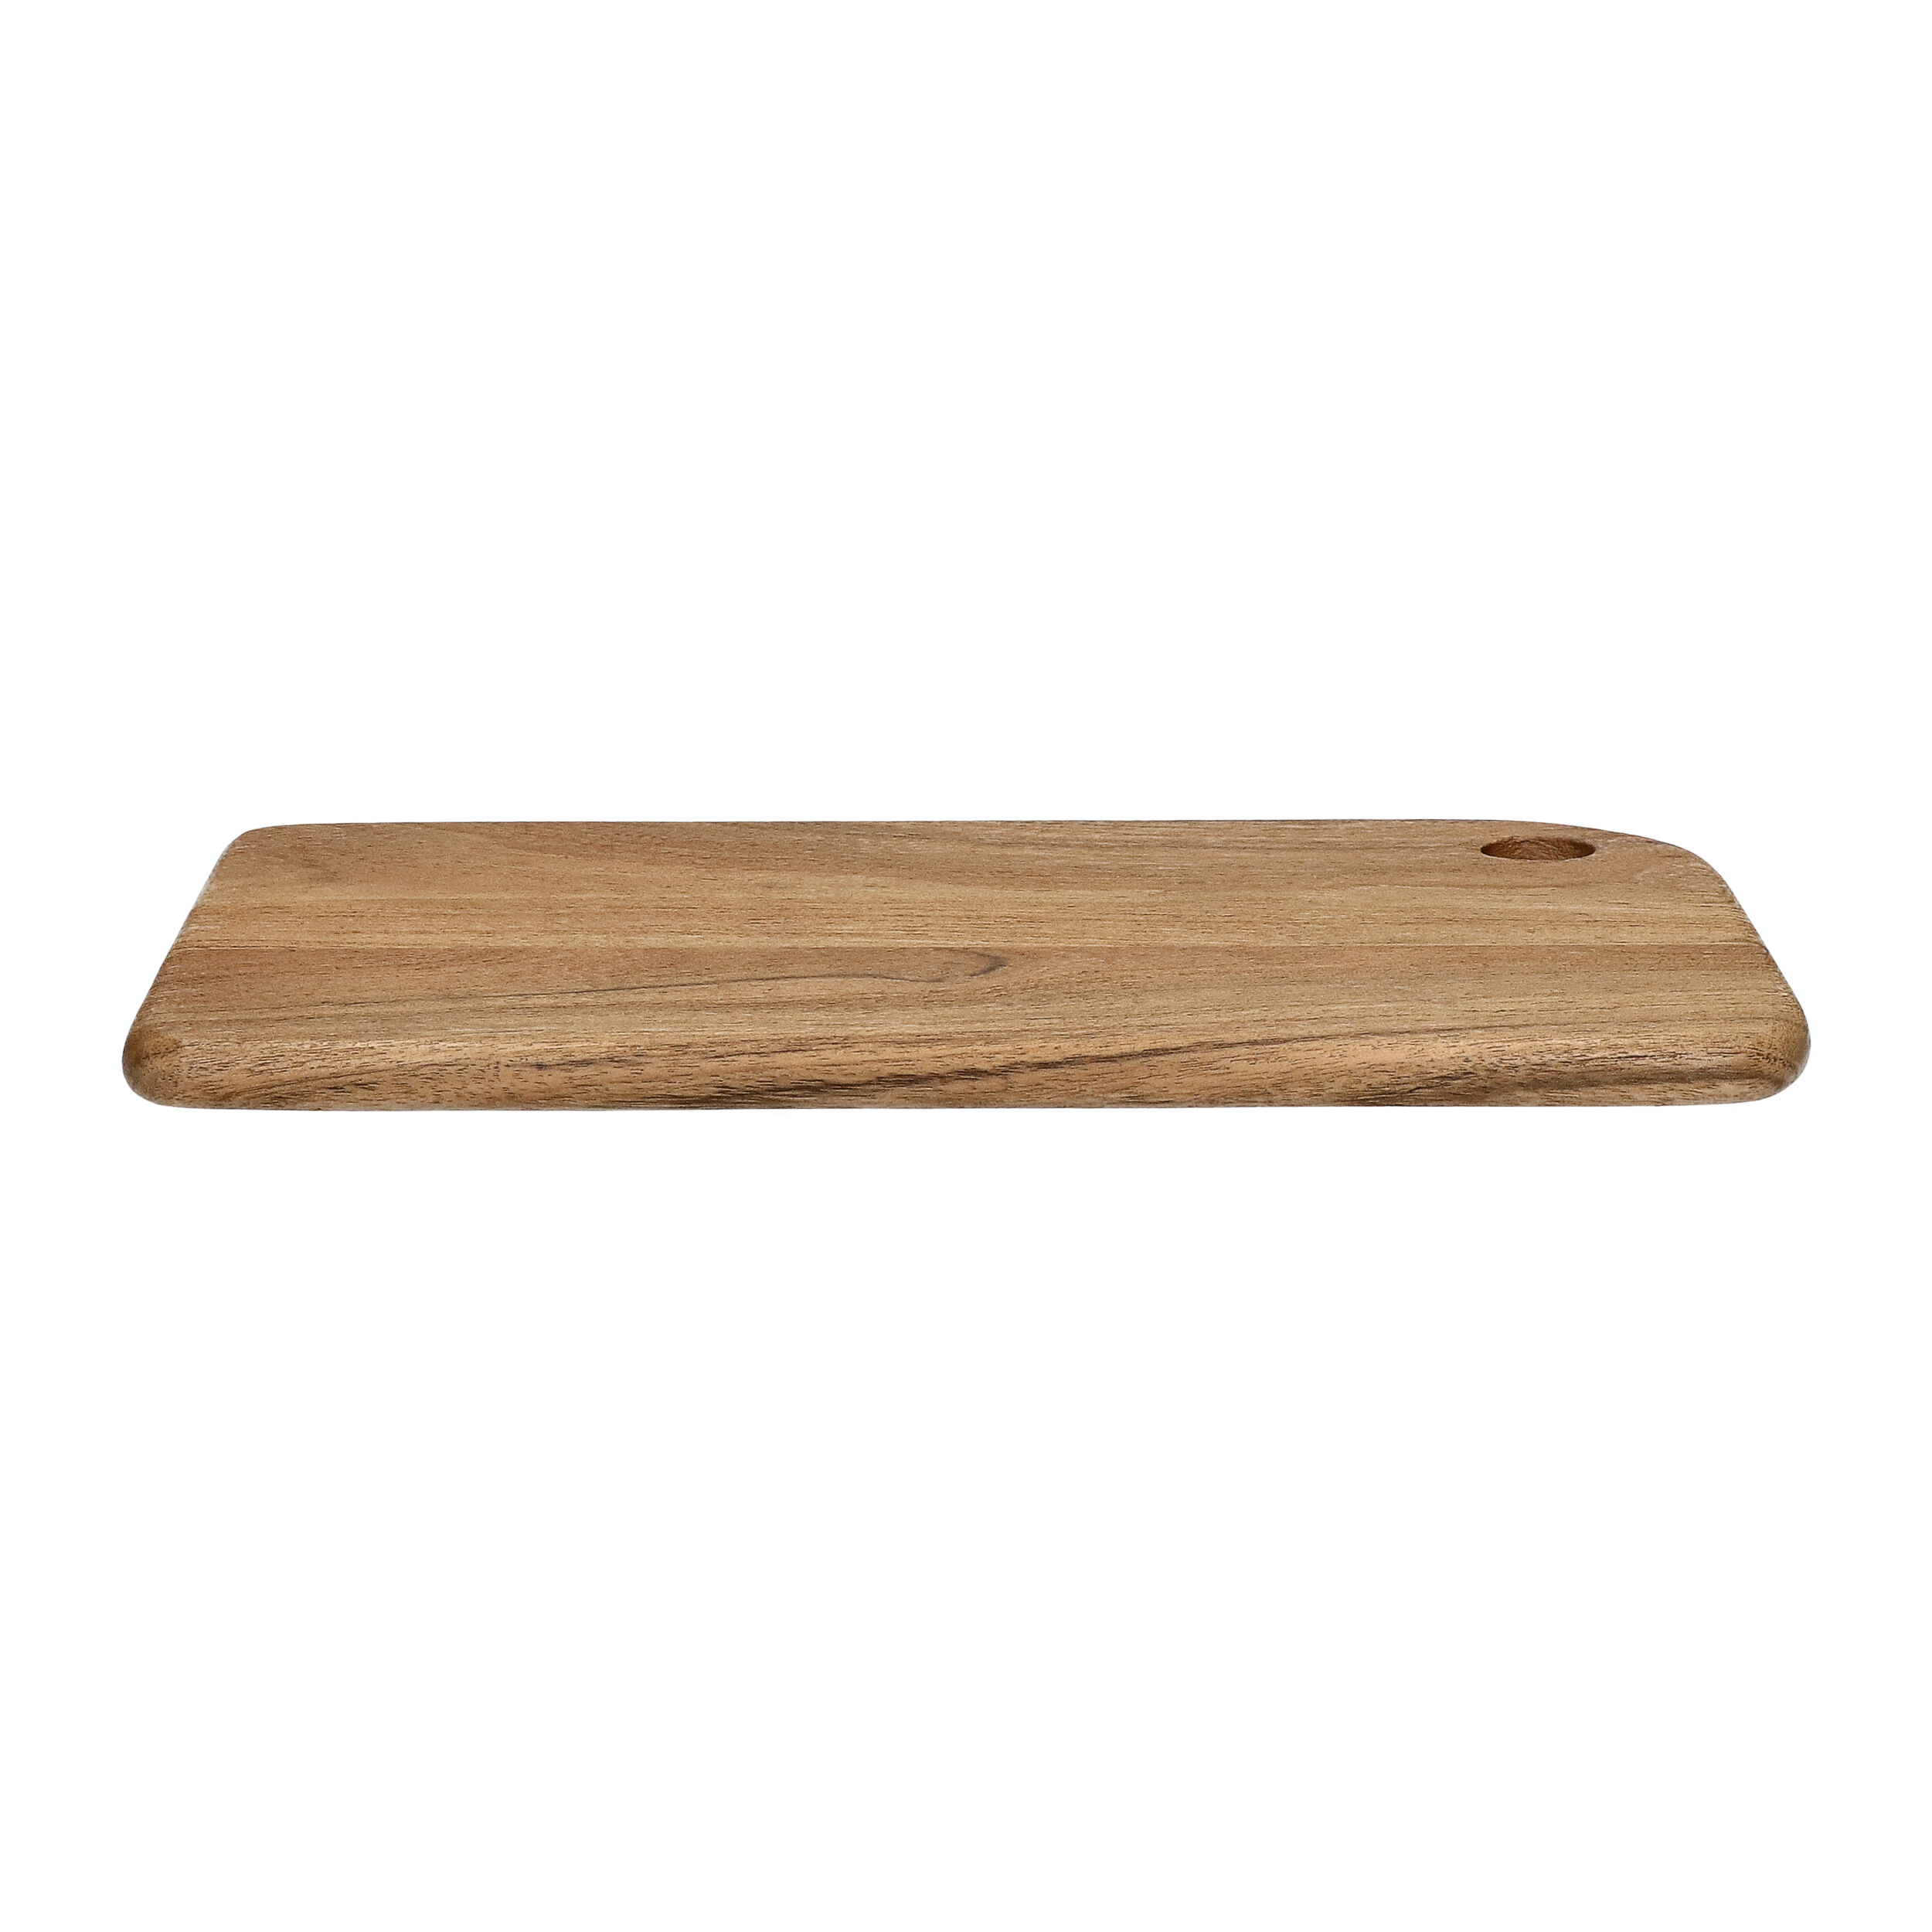 Cutting boards - Discover our contemporary cutting boards